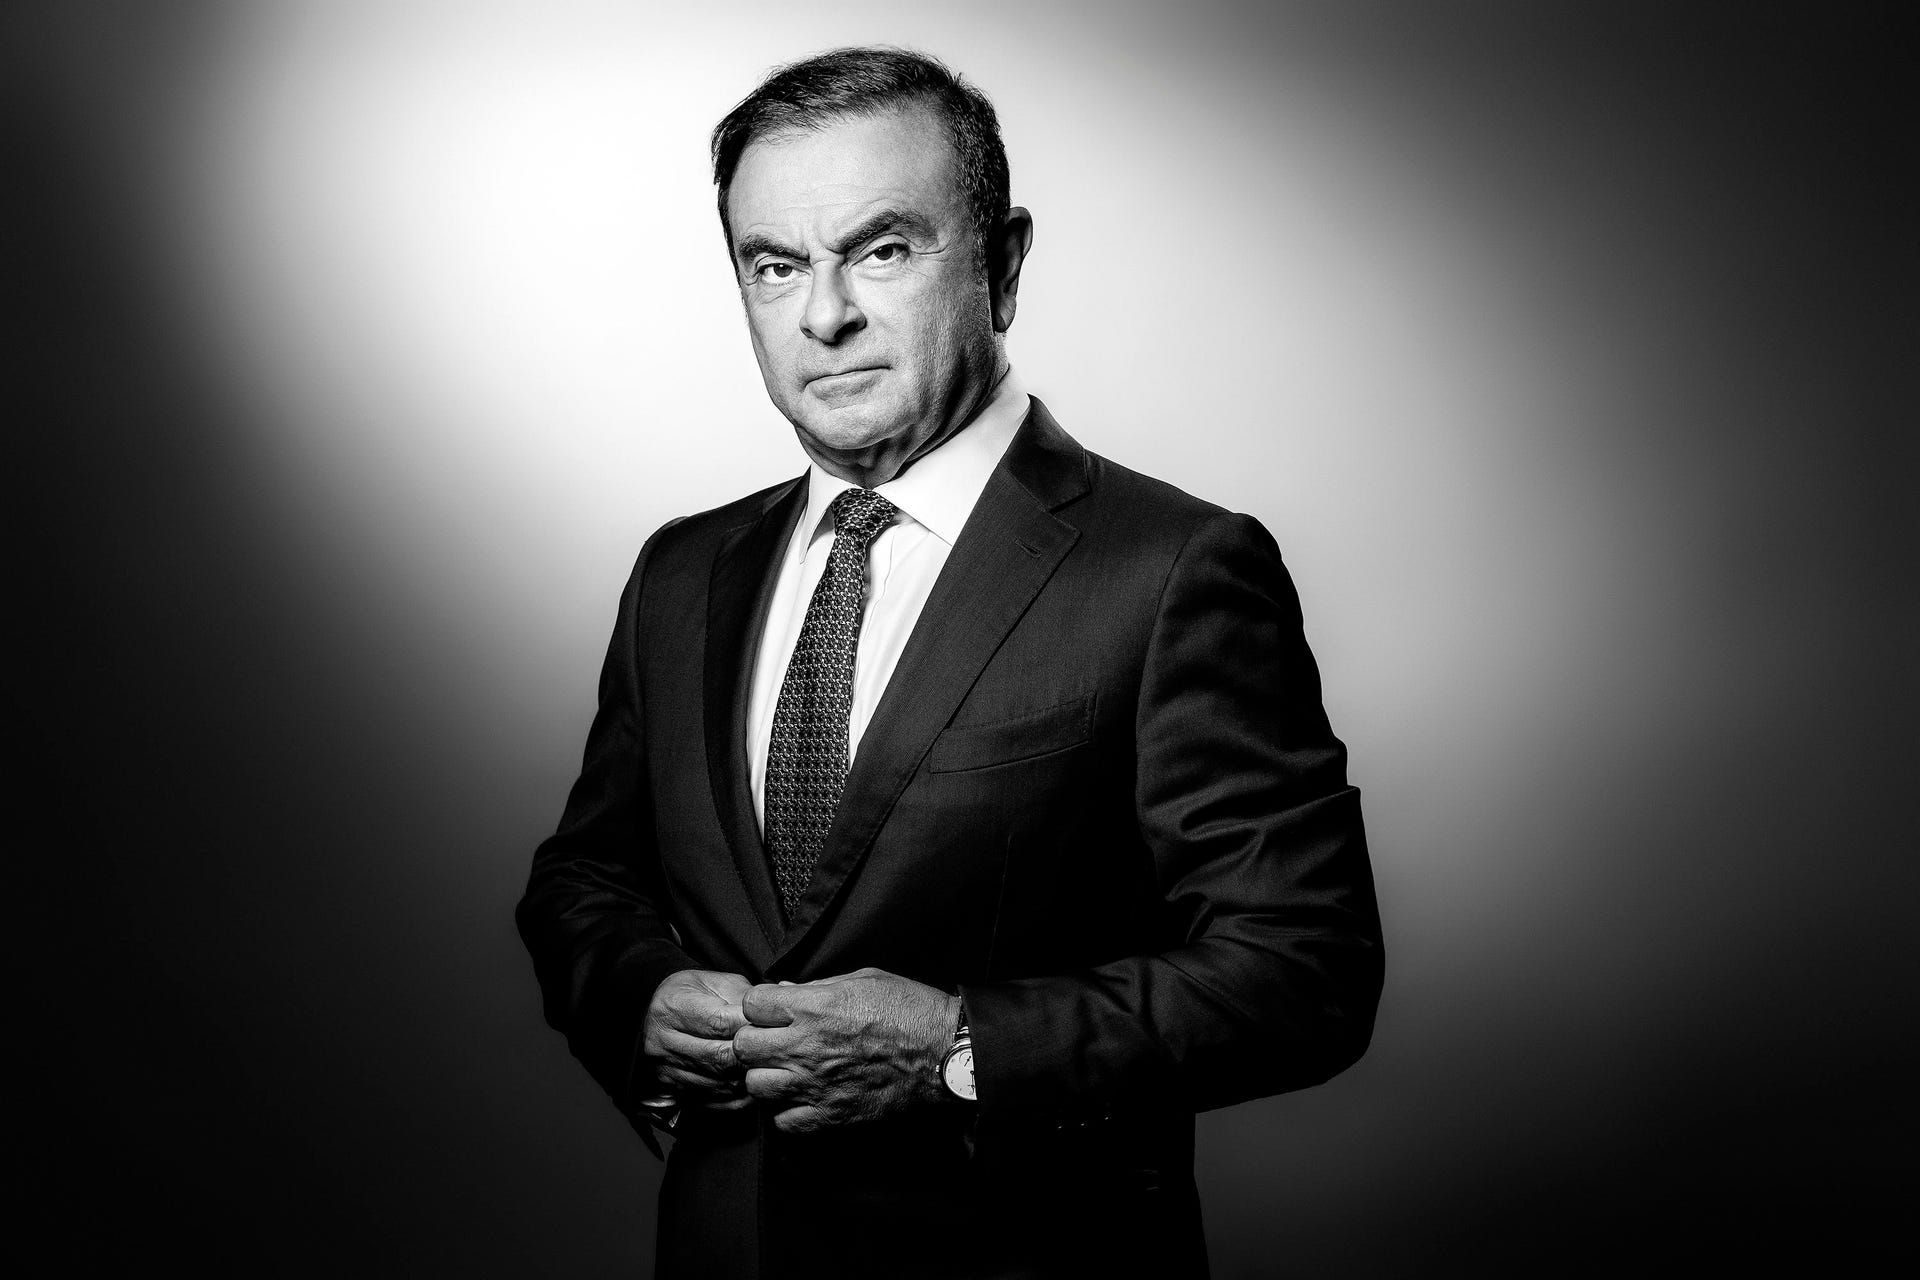 TOPSHOT-FRANCE-PORTRAIT-GHOSN-RENAULT-BLACK AND WHITE